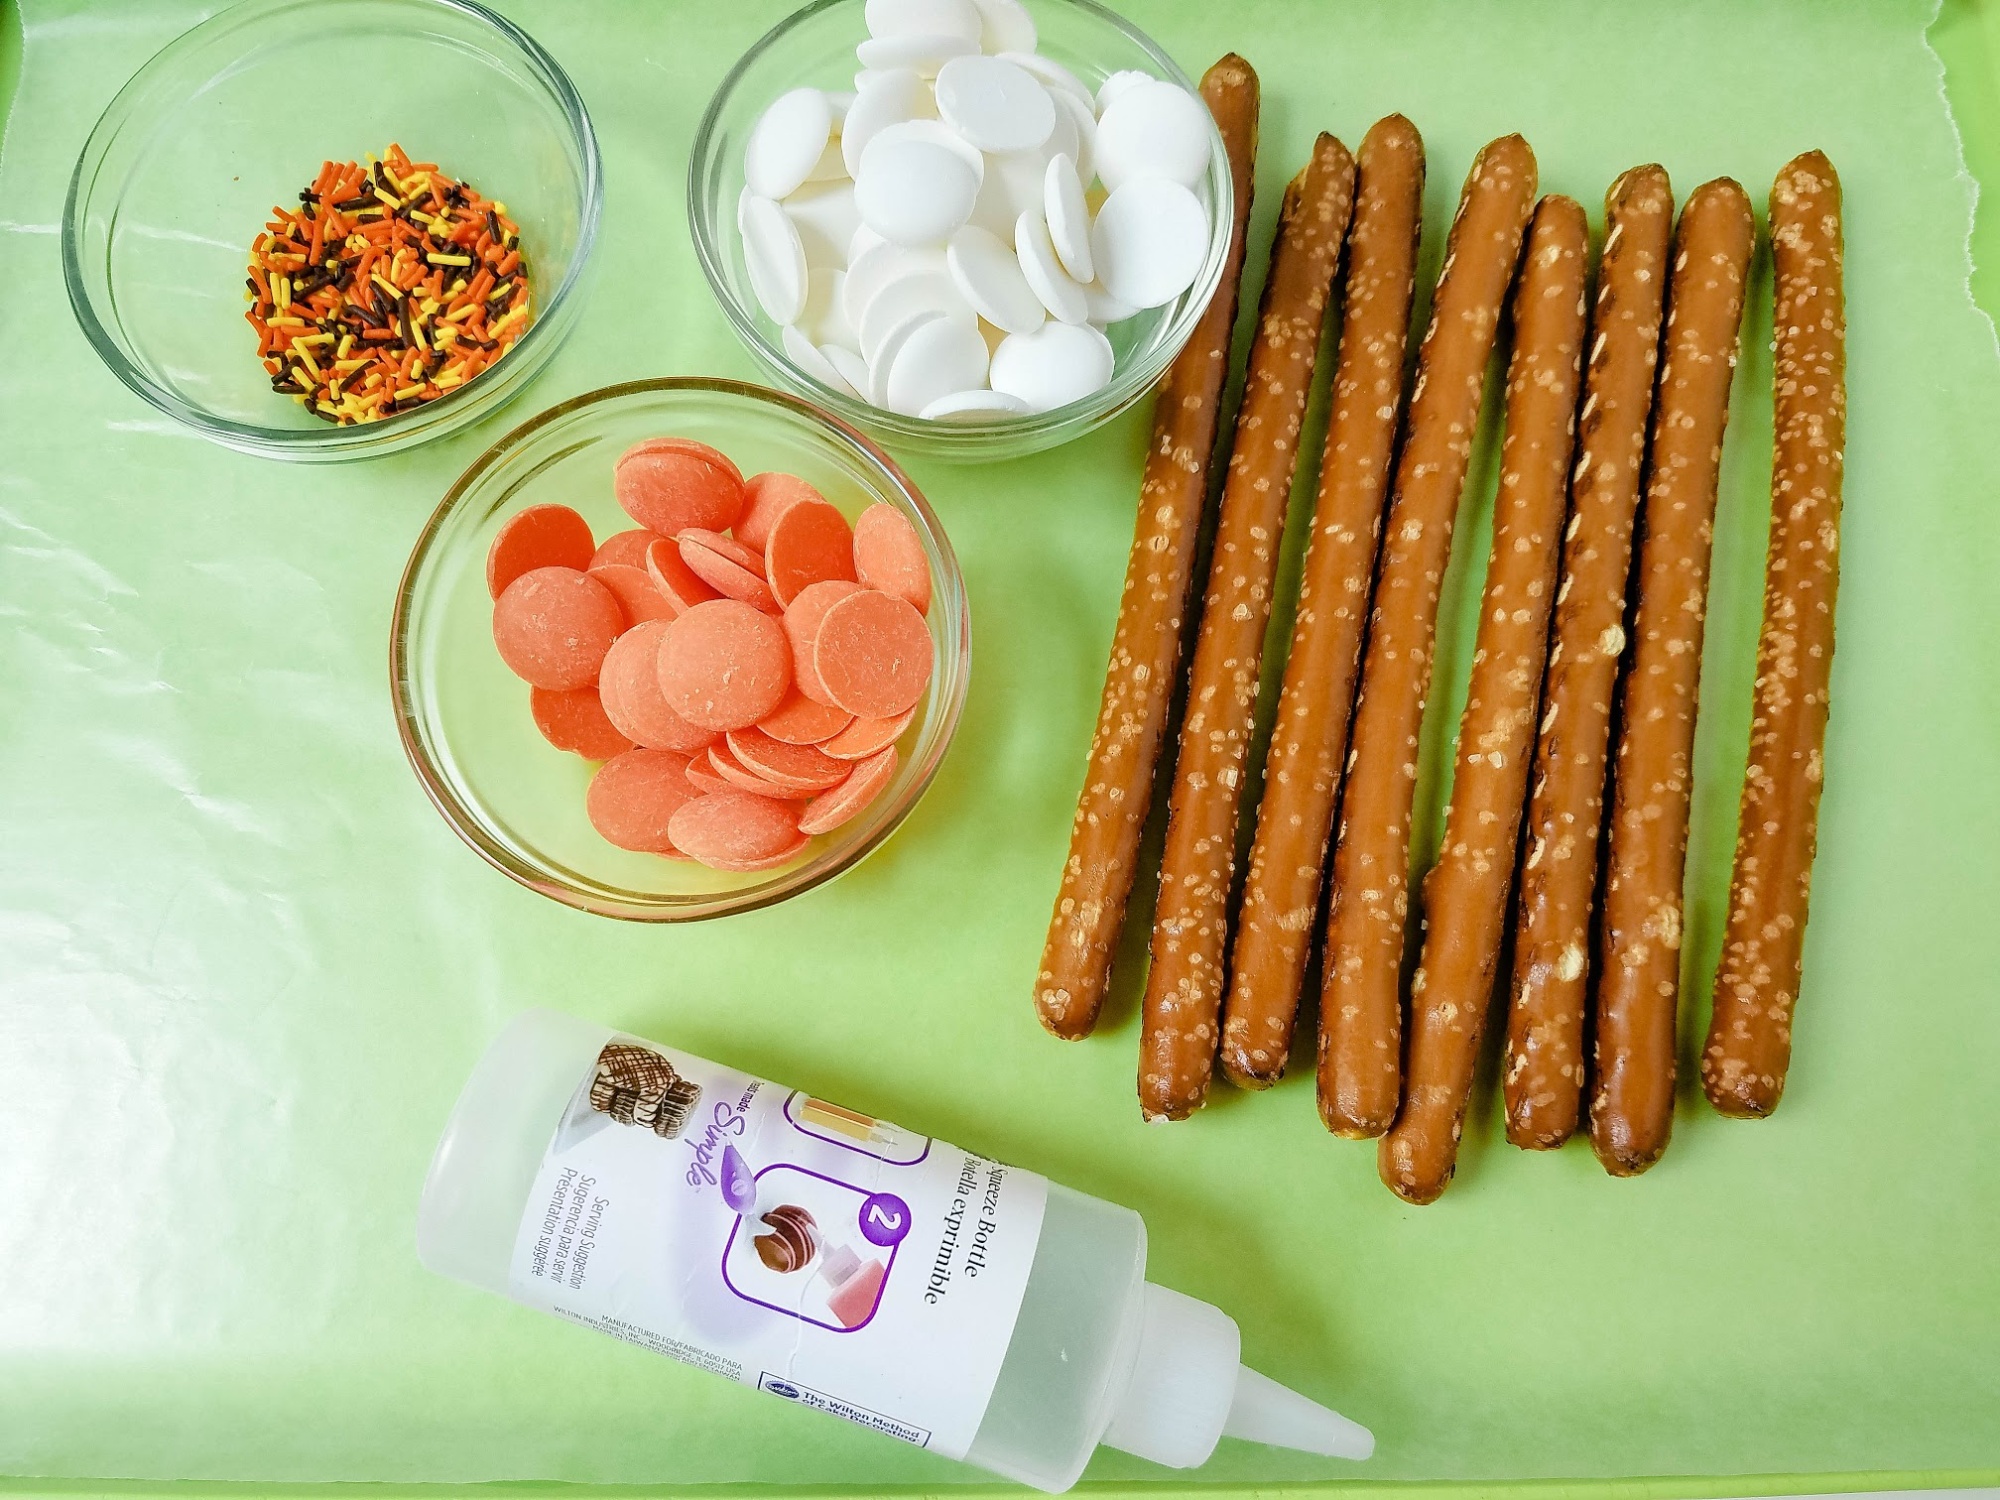 Ingredients for easy snack idea